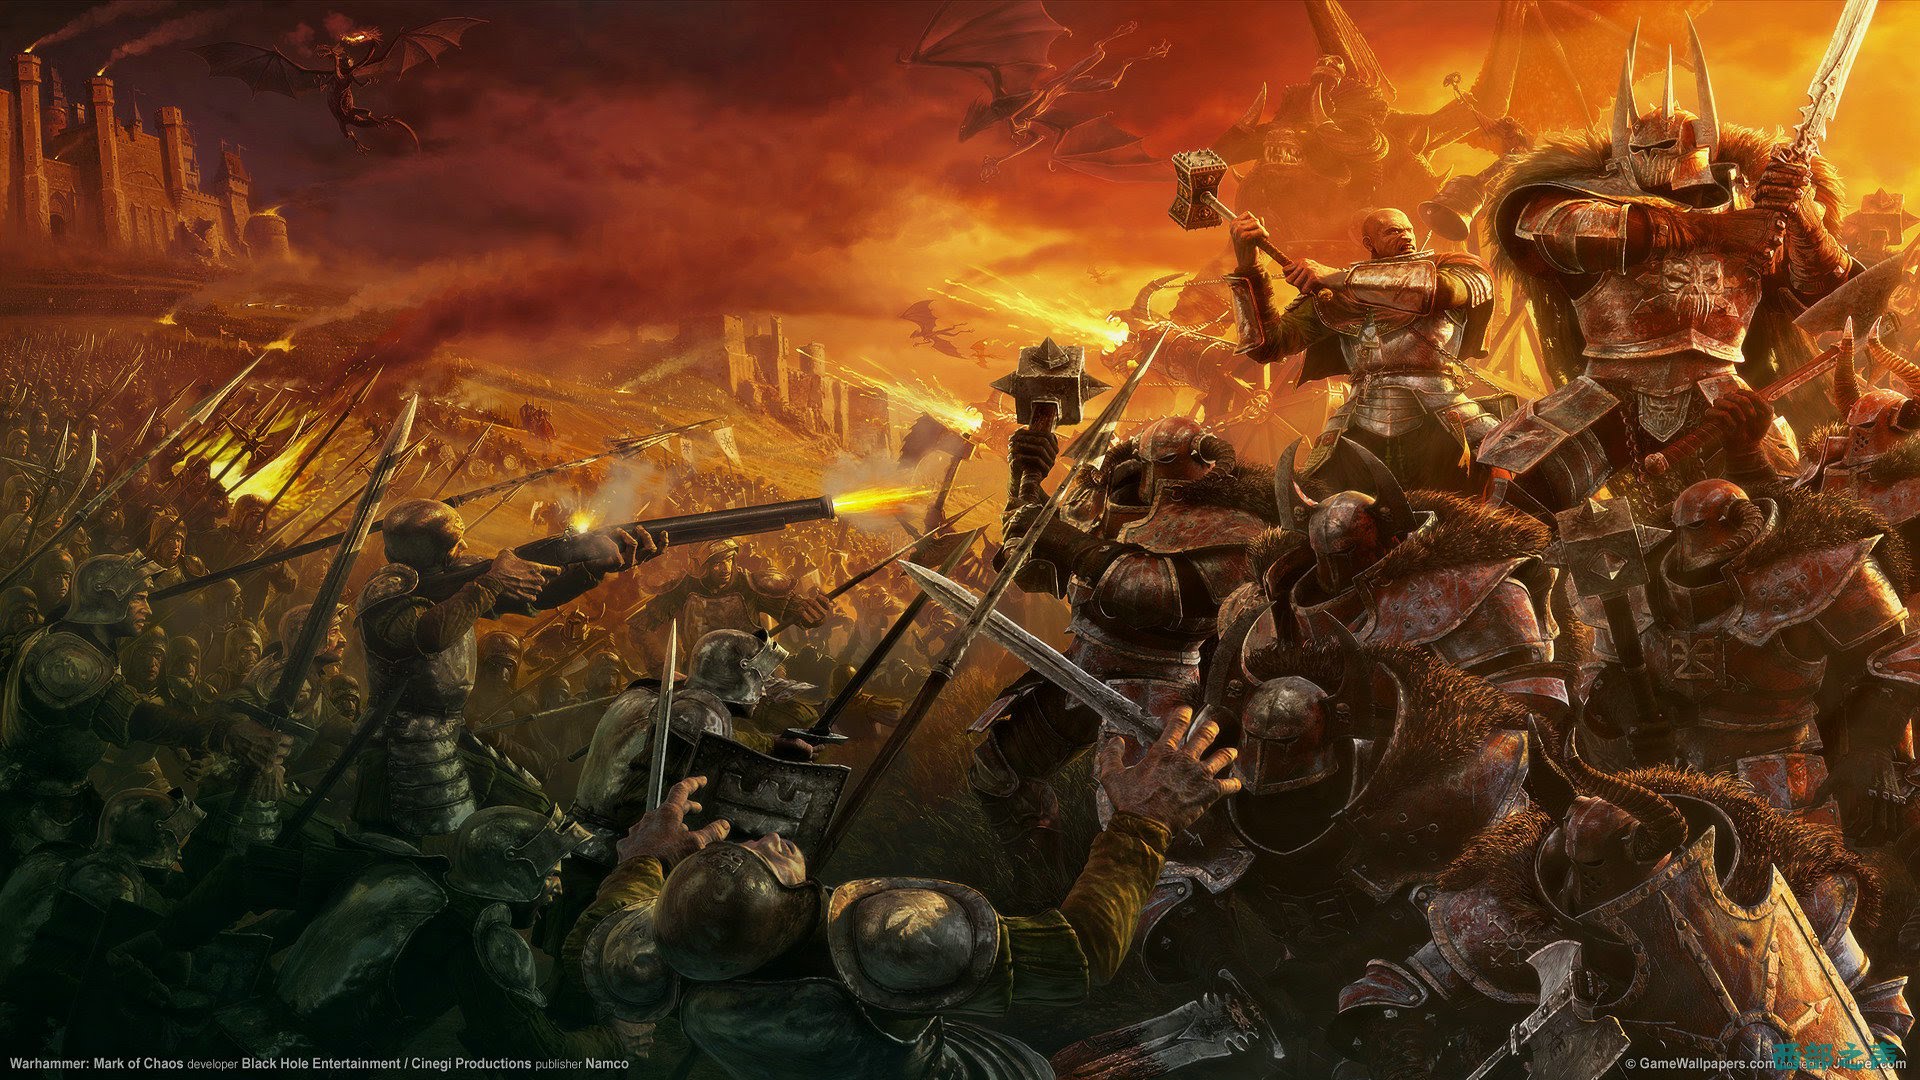 The Warhammer RPG grew out of a miniatures wargaming system, and battles between armies remain a major part of the roleplaying version of the game.